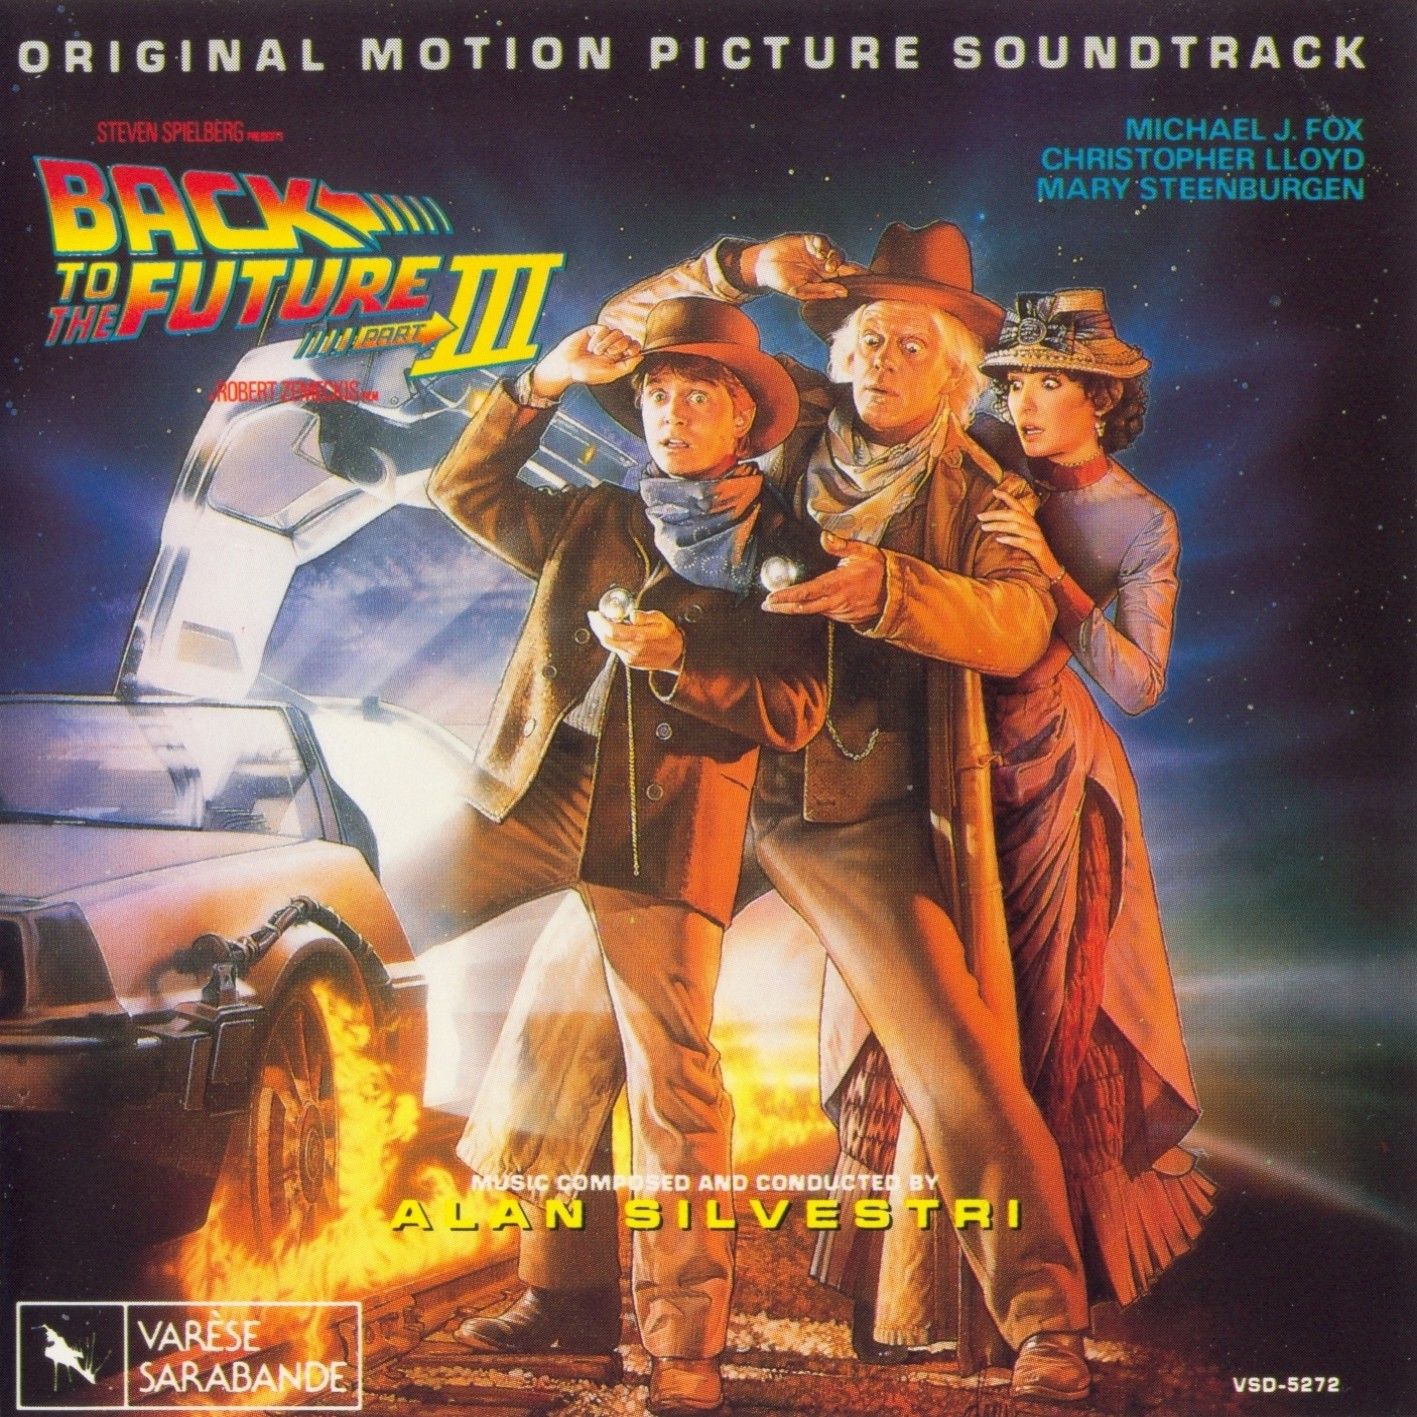 back to the future 3 soundtrack